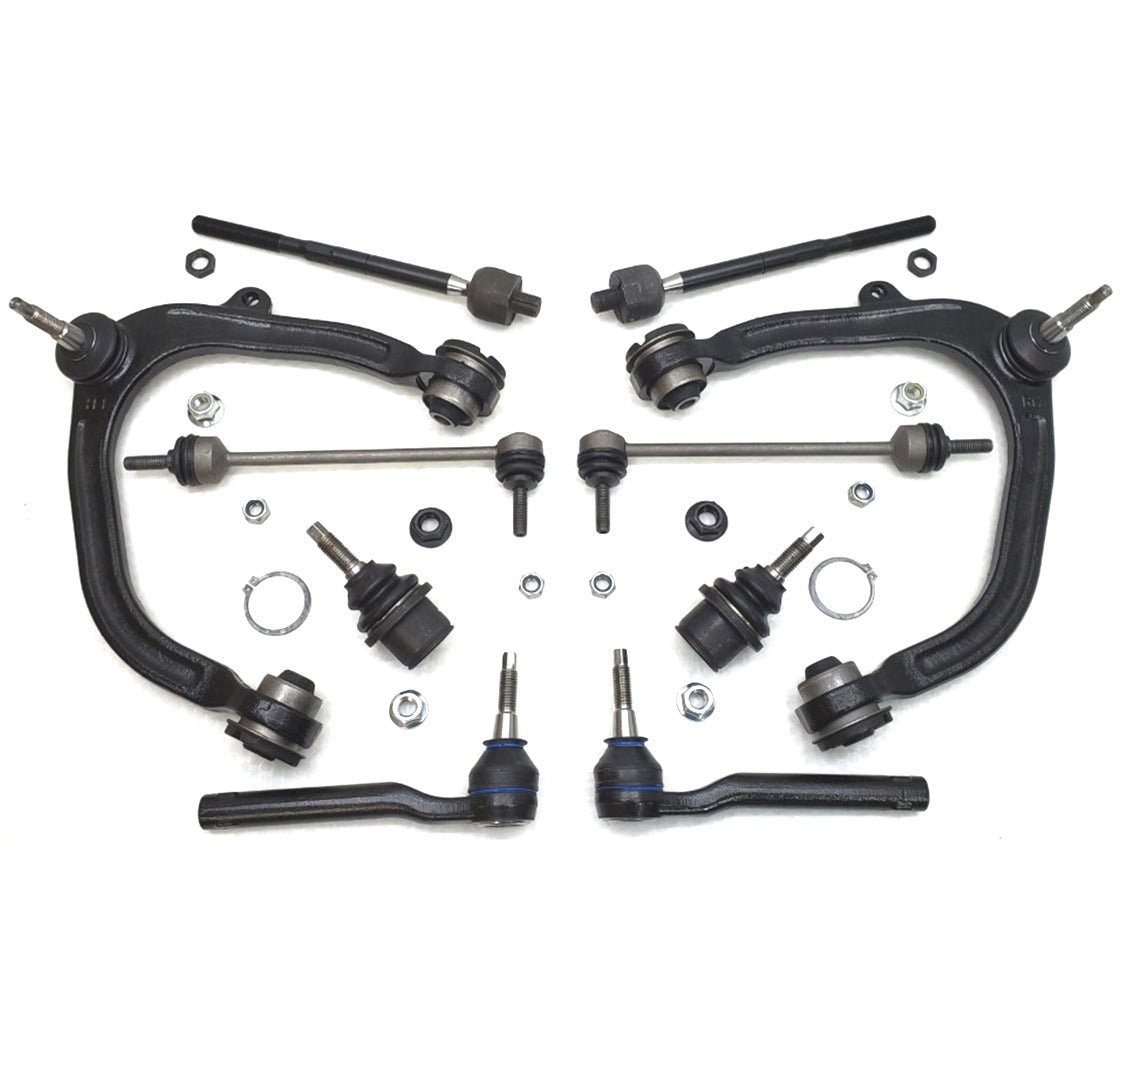 HD Control Arm Ball Joint Tie Rod Steering Kit for 2010-2014 Ford F150 SVT Raptor 6.2L 4x4